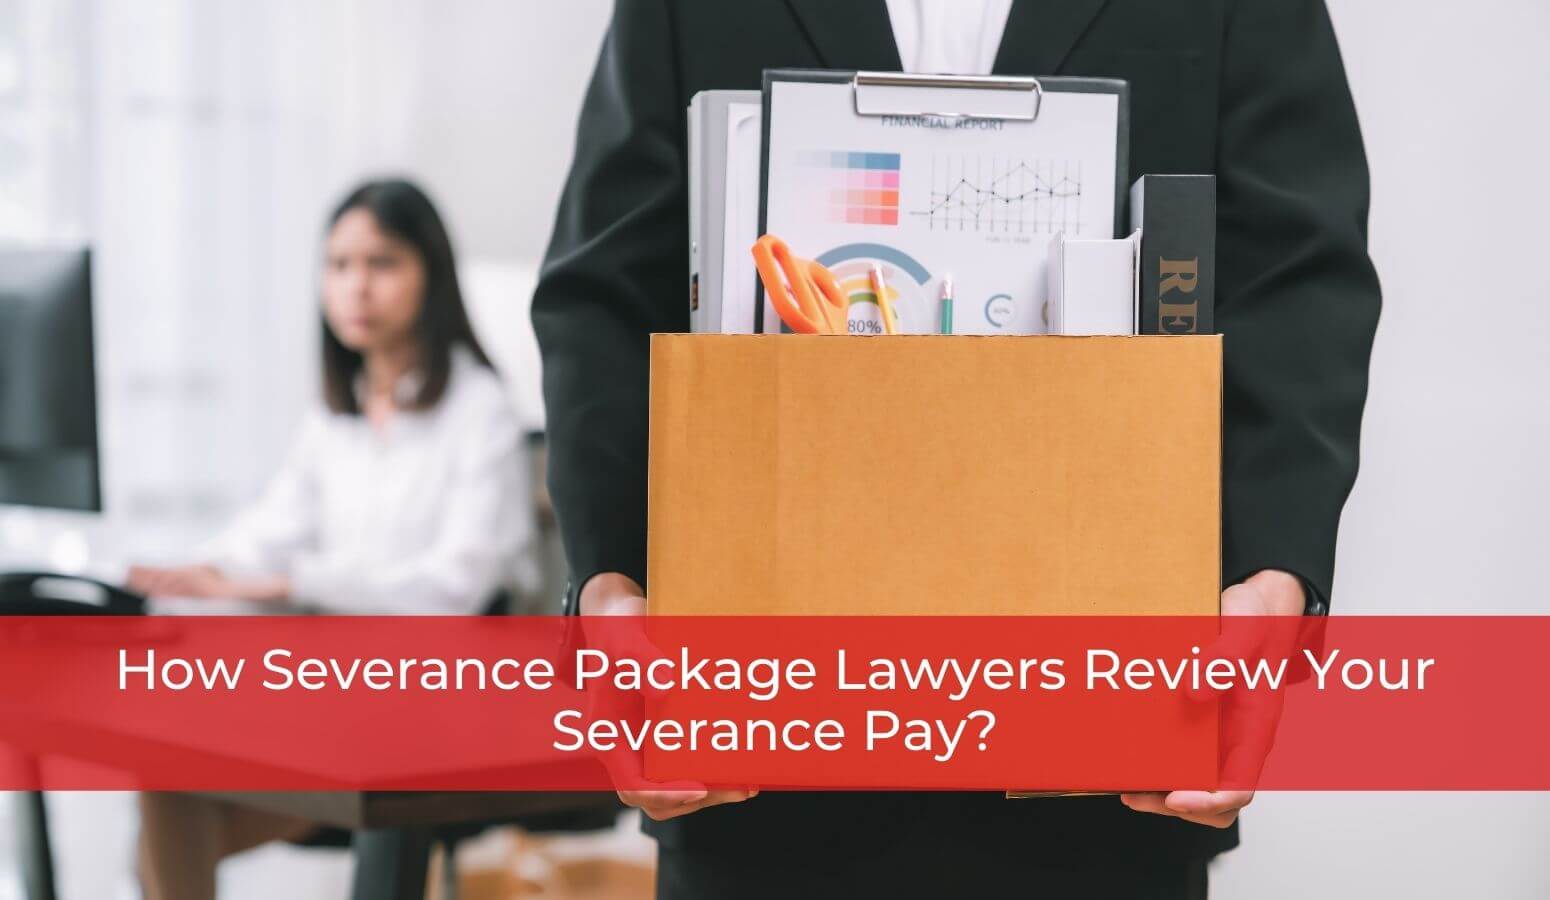 Featured image for “How Severance Package Lawyers Review Your Severance Pay?”